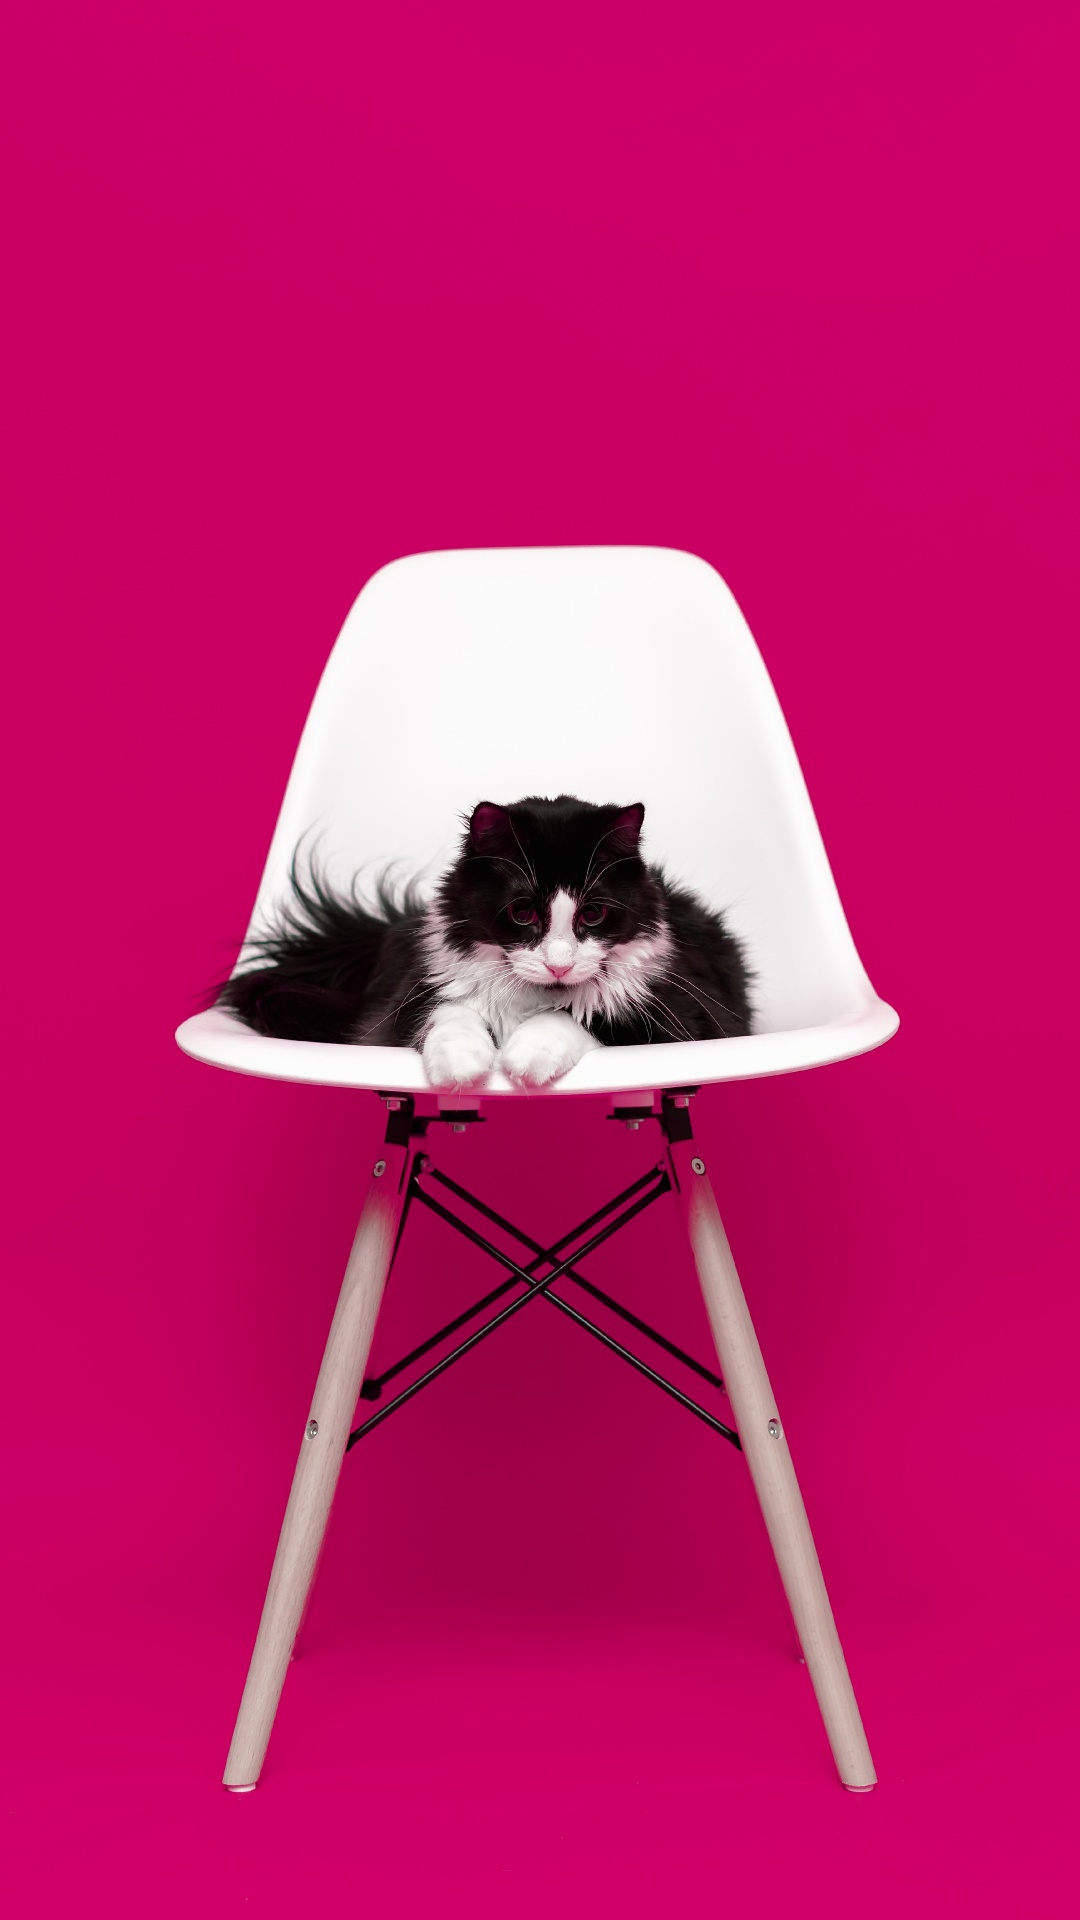 Black and White Cat on White Chair. Wallpaper in 1080x1920 Resolution